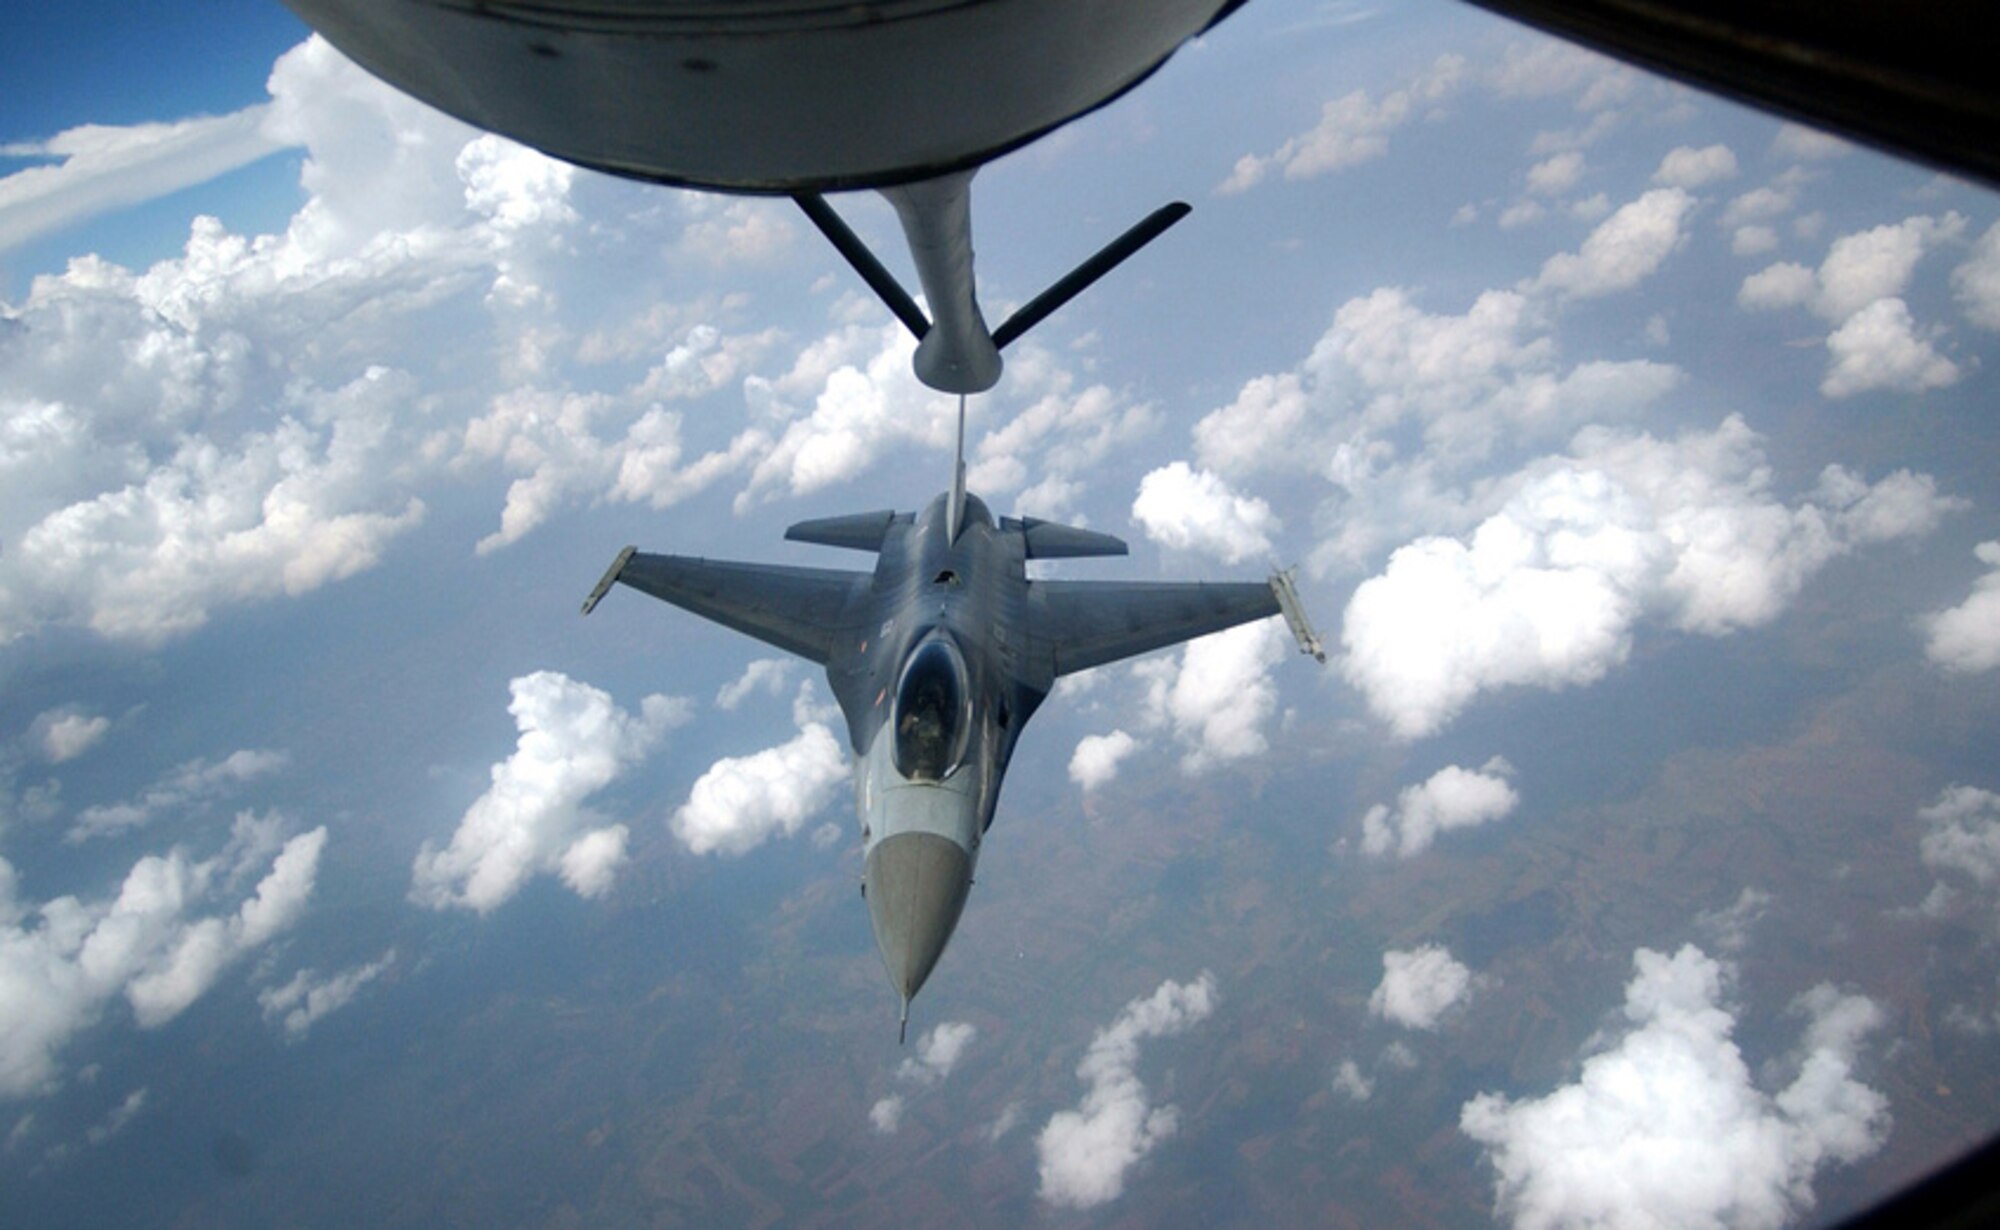 KORAT AIR BASE, Thailand (AFPN) -- An F-16 Fighting Falcon prepares for refueling by a KC-135 Stratotanker from the 909th Air Refueling Squadron at Kadena Air Base, Japan, during Cope Tiger 2003. Cope Tiger is an annual joint/combined air-to-air, air-to-ground and large force employment training exercise. (U.S. Air Force photo by Staff Sgt. Cecilio M. Ricardo Jr.)